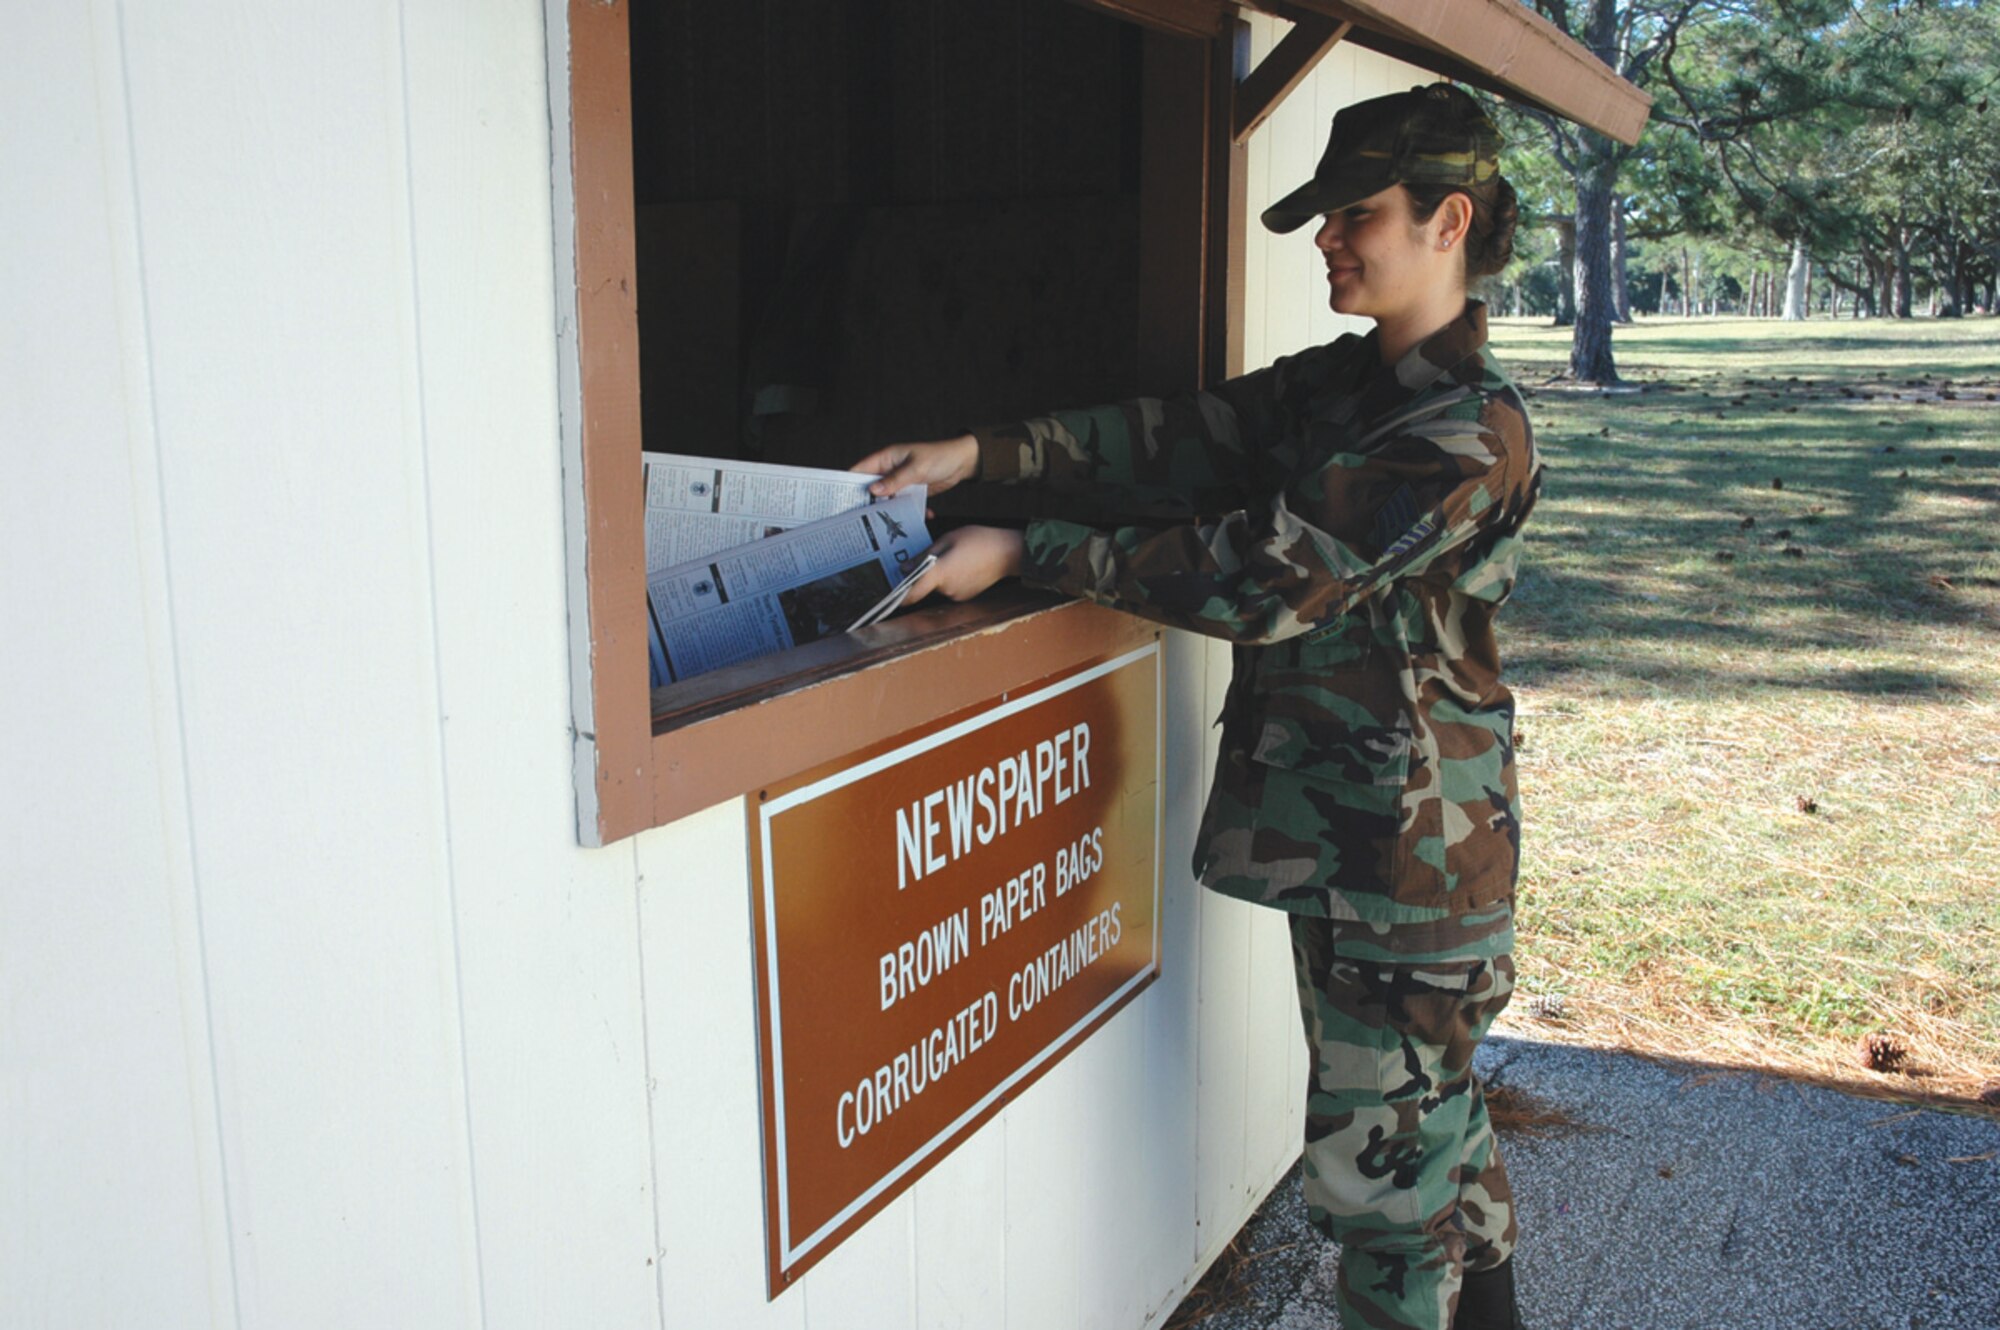 TYNDALL AIR FORCE BASE, Fla. --  Staff Sgt. Melissa Johnson, 325th Fighter Wing, recycles the Gulf Defender after reading it. Paper products such as newspaper, magazines and phone books are all deposited in the newspaper bins. The center requests magazines and similar items be bagged seperate from other paper items for easier sorting. (U.S. Air Force photo by Staff Sgt. Stacey Haga)